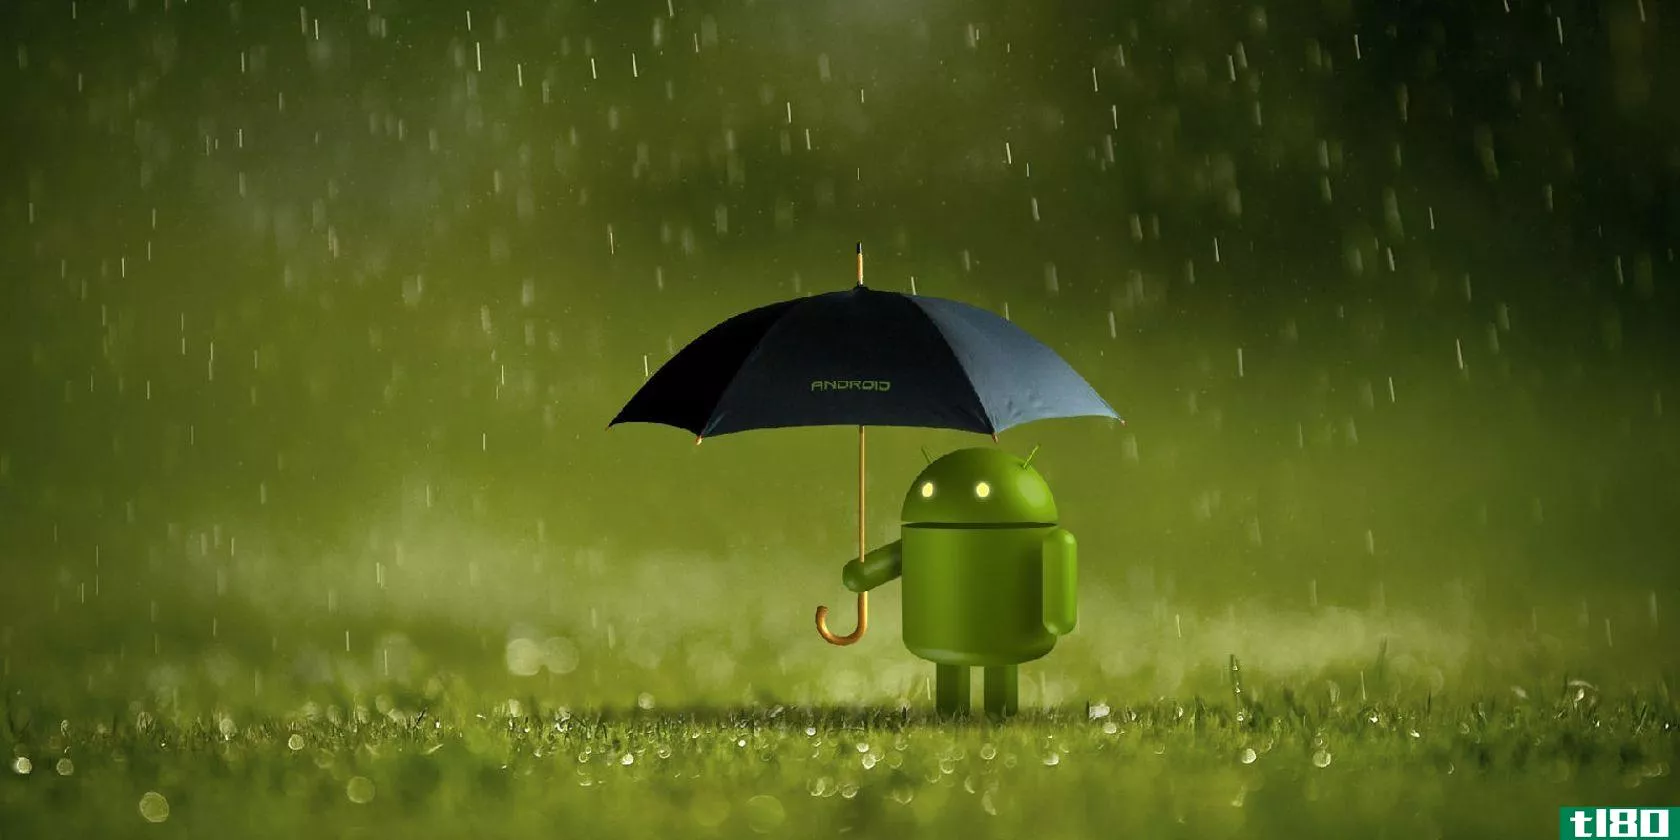 Android standing in rain holding umbrella